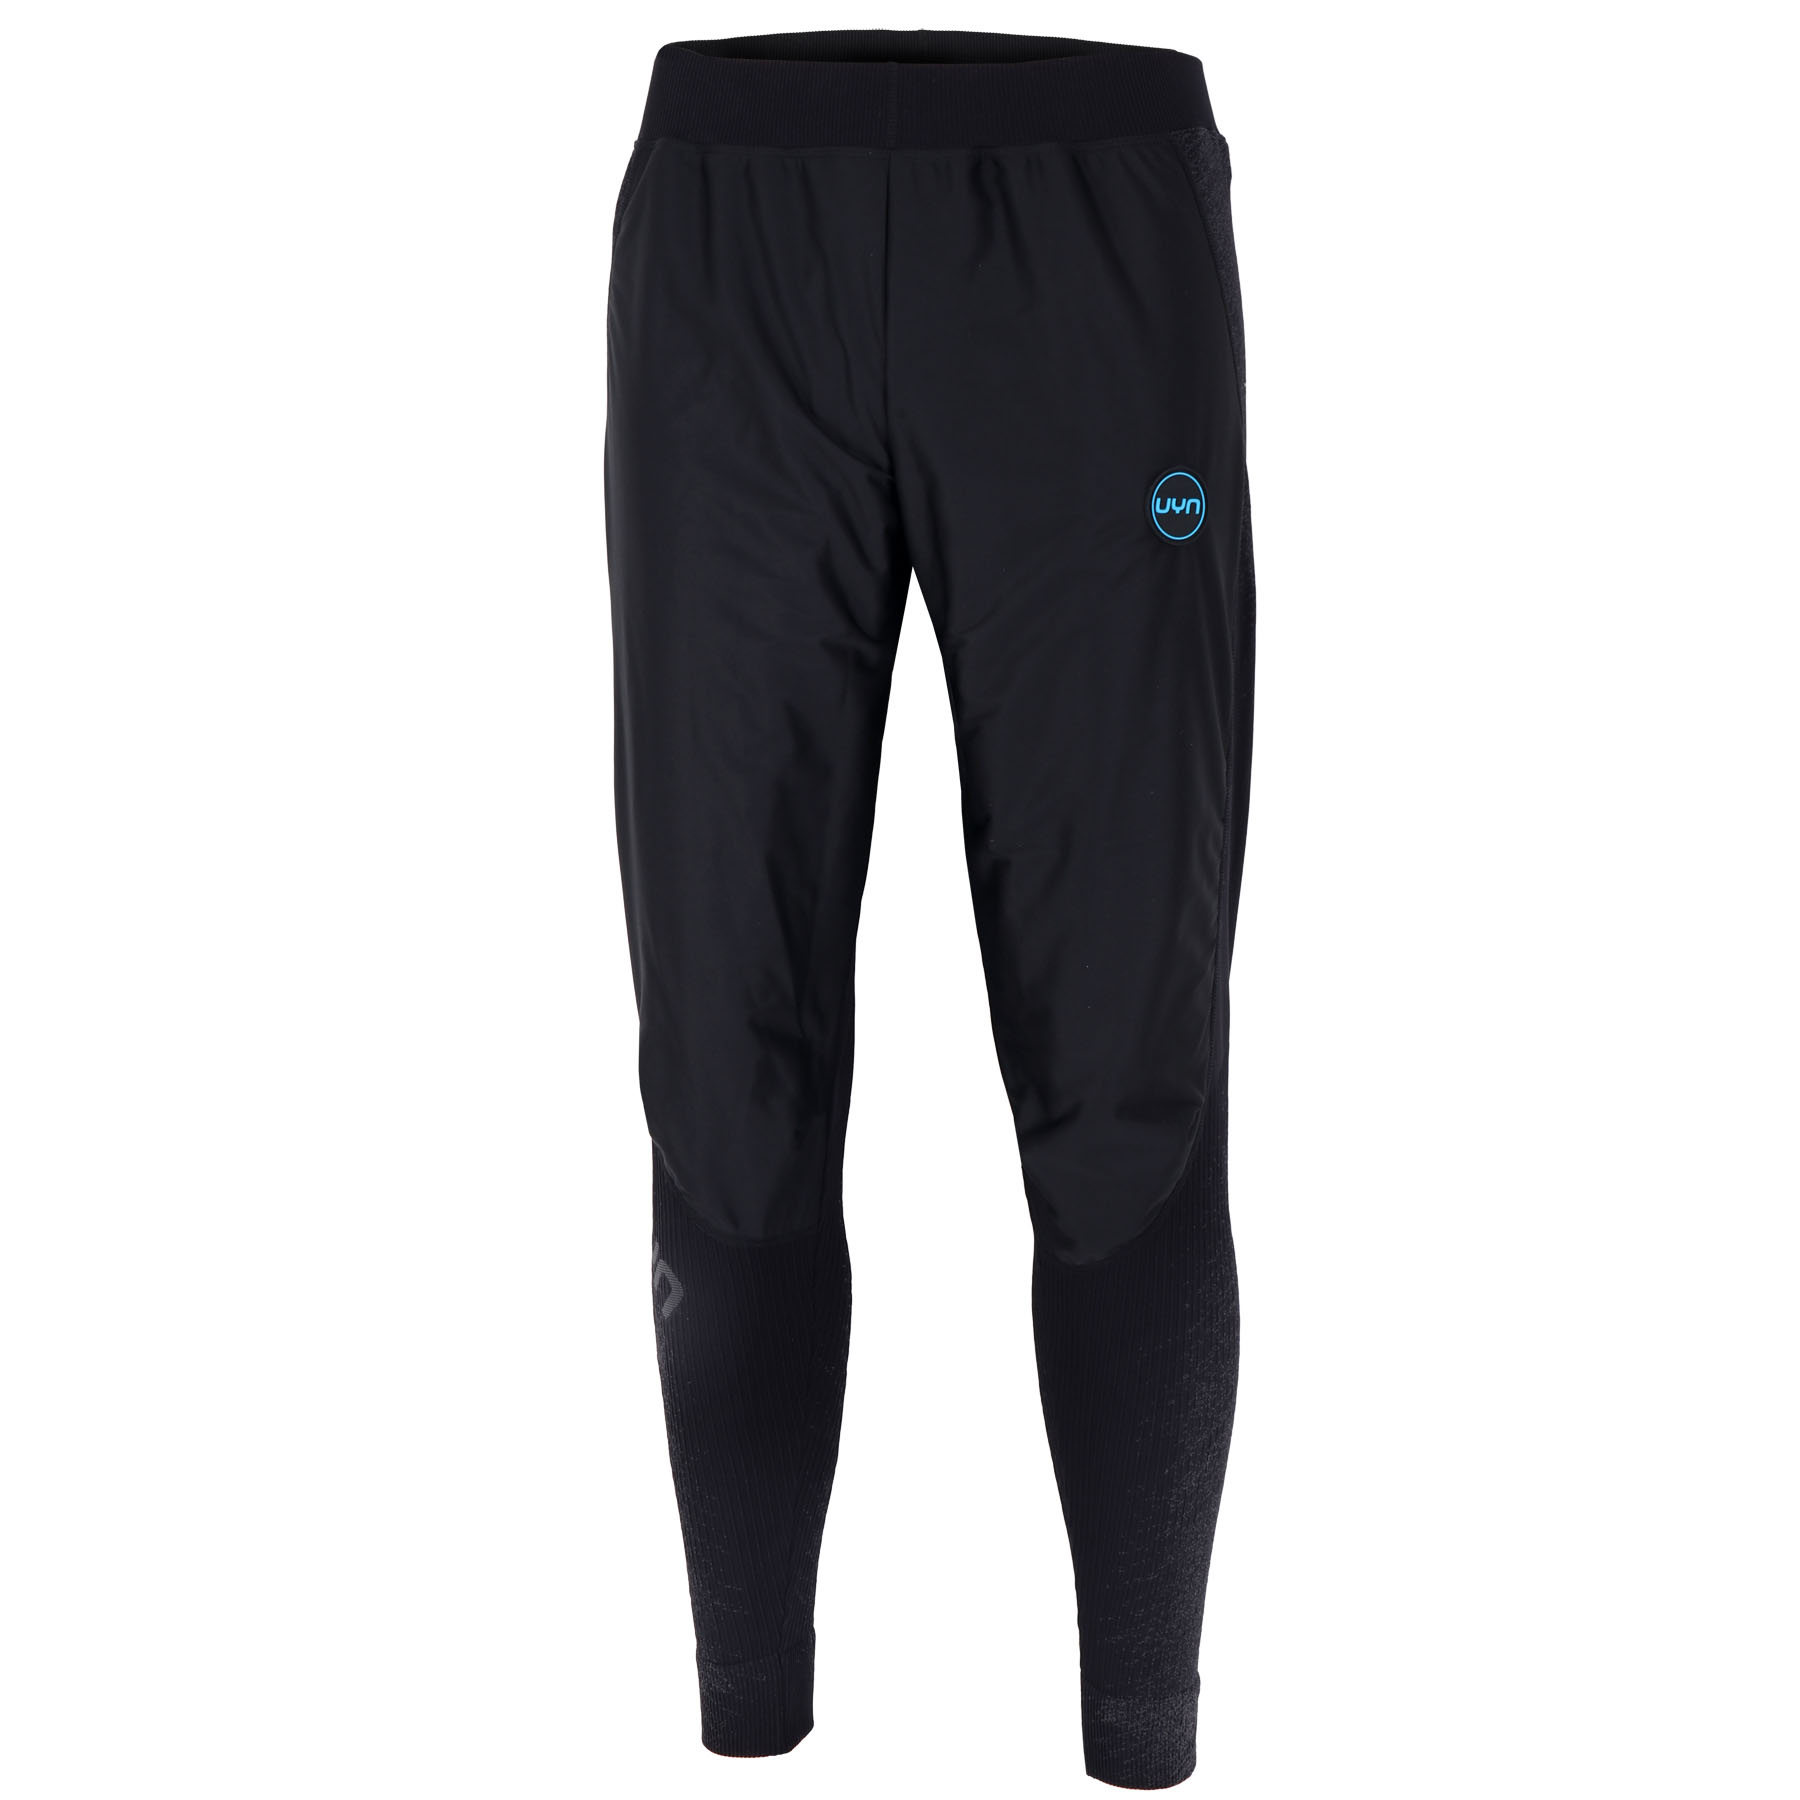 Picture of UYN Cross Country Skiing Wind Pants Long - Black/Cloud